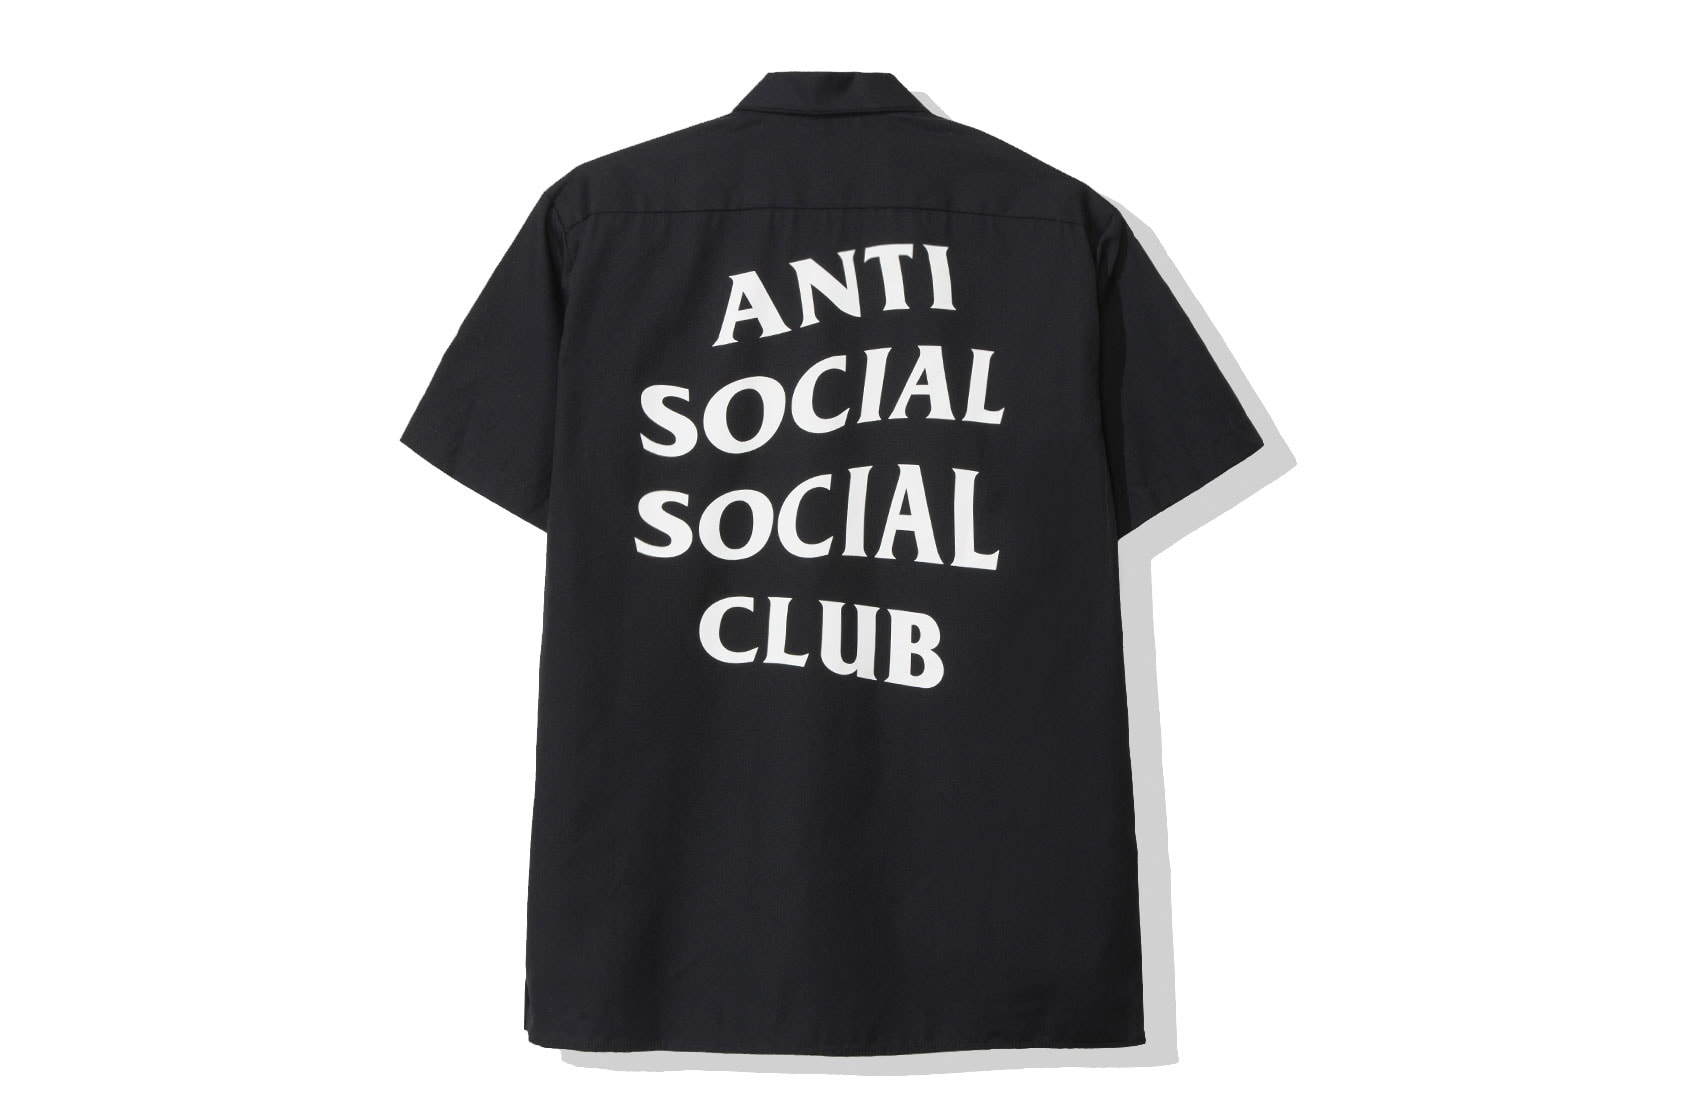 Anti Social Social Club FW19 "STILL STRESSED" Collection full items undefeated collaborations honda playboy accessories tenga 